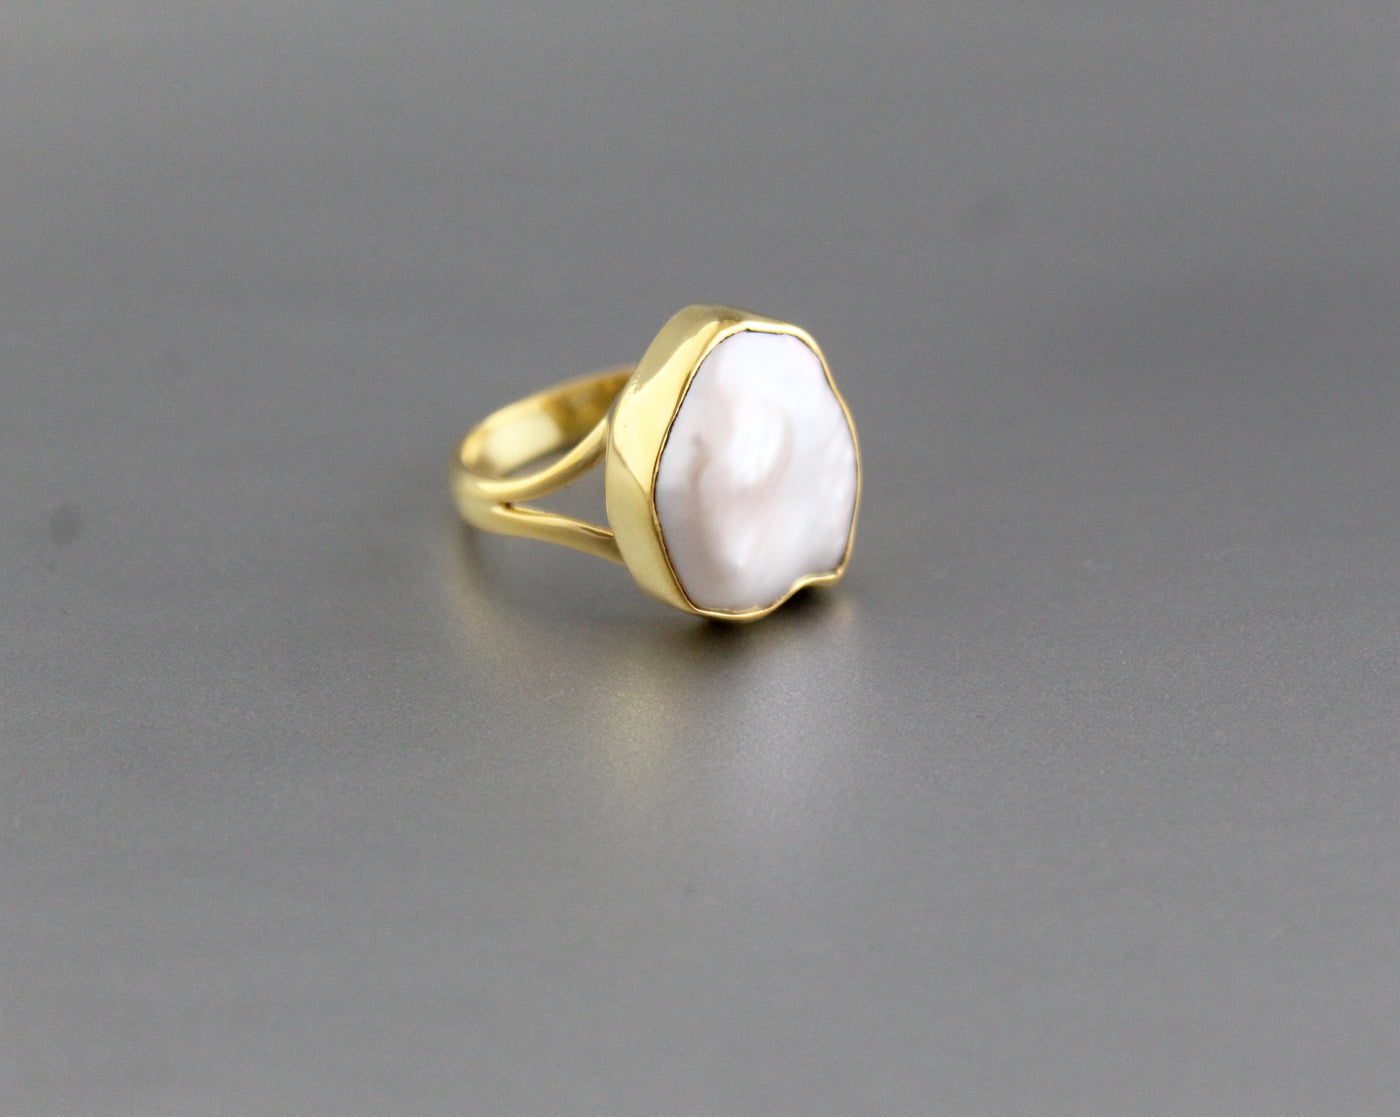 Real Freshwater Pearl Rings for Women,white Big Natural Pearl Ring Silver  plated Rose Shape Pearl Jewelry Birthday Gift Size 5-11 | Wish